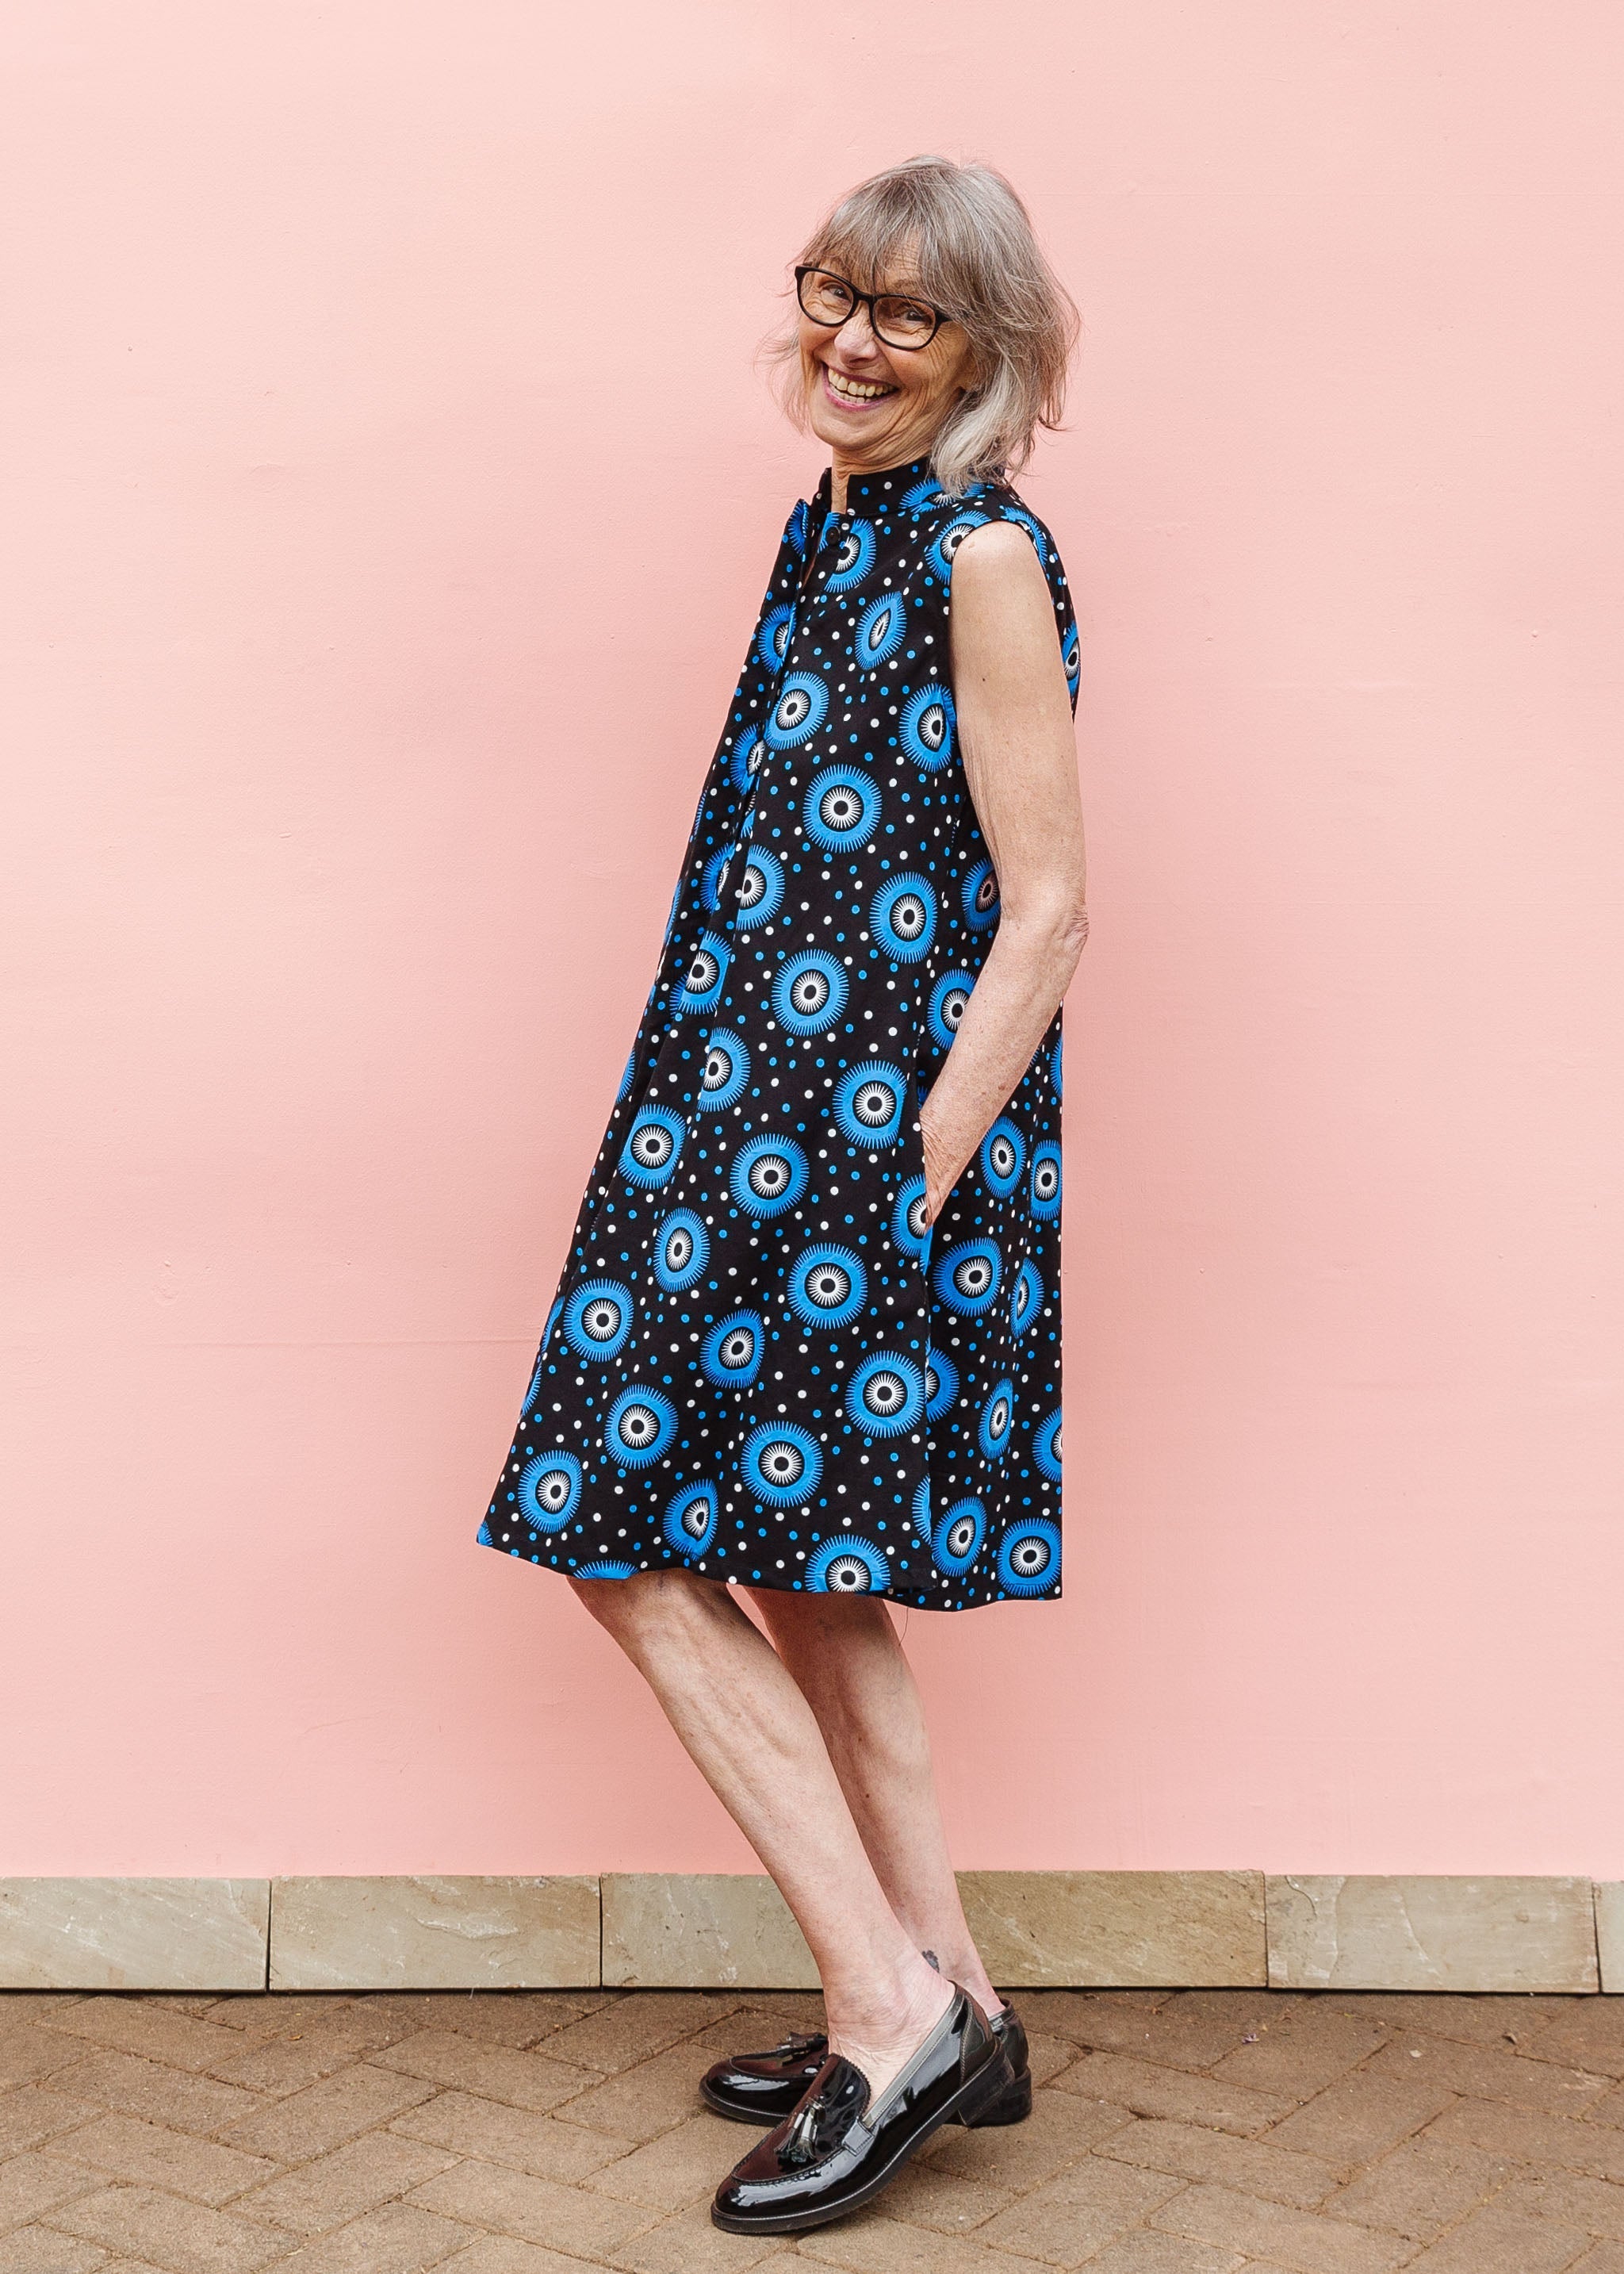 Model wearing black sleeveless dress with blue and white circle print.